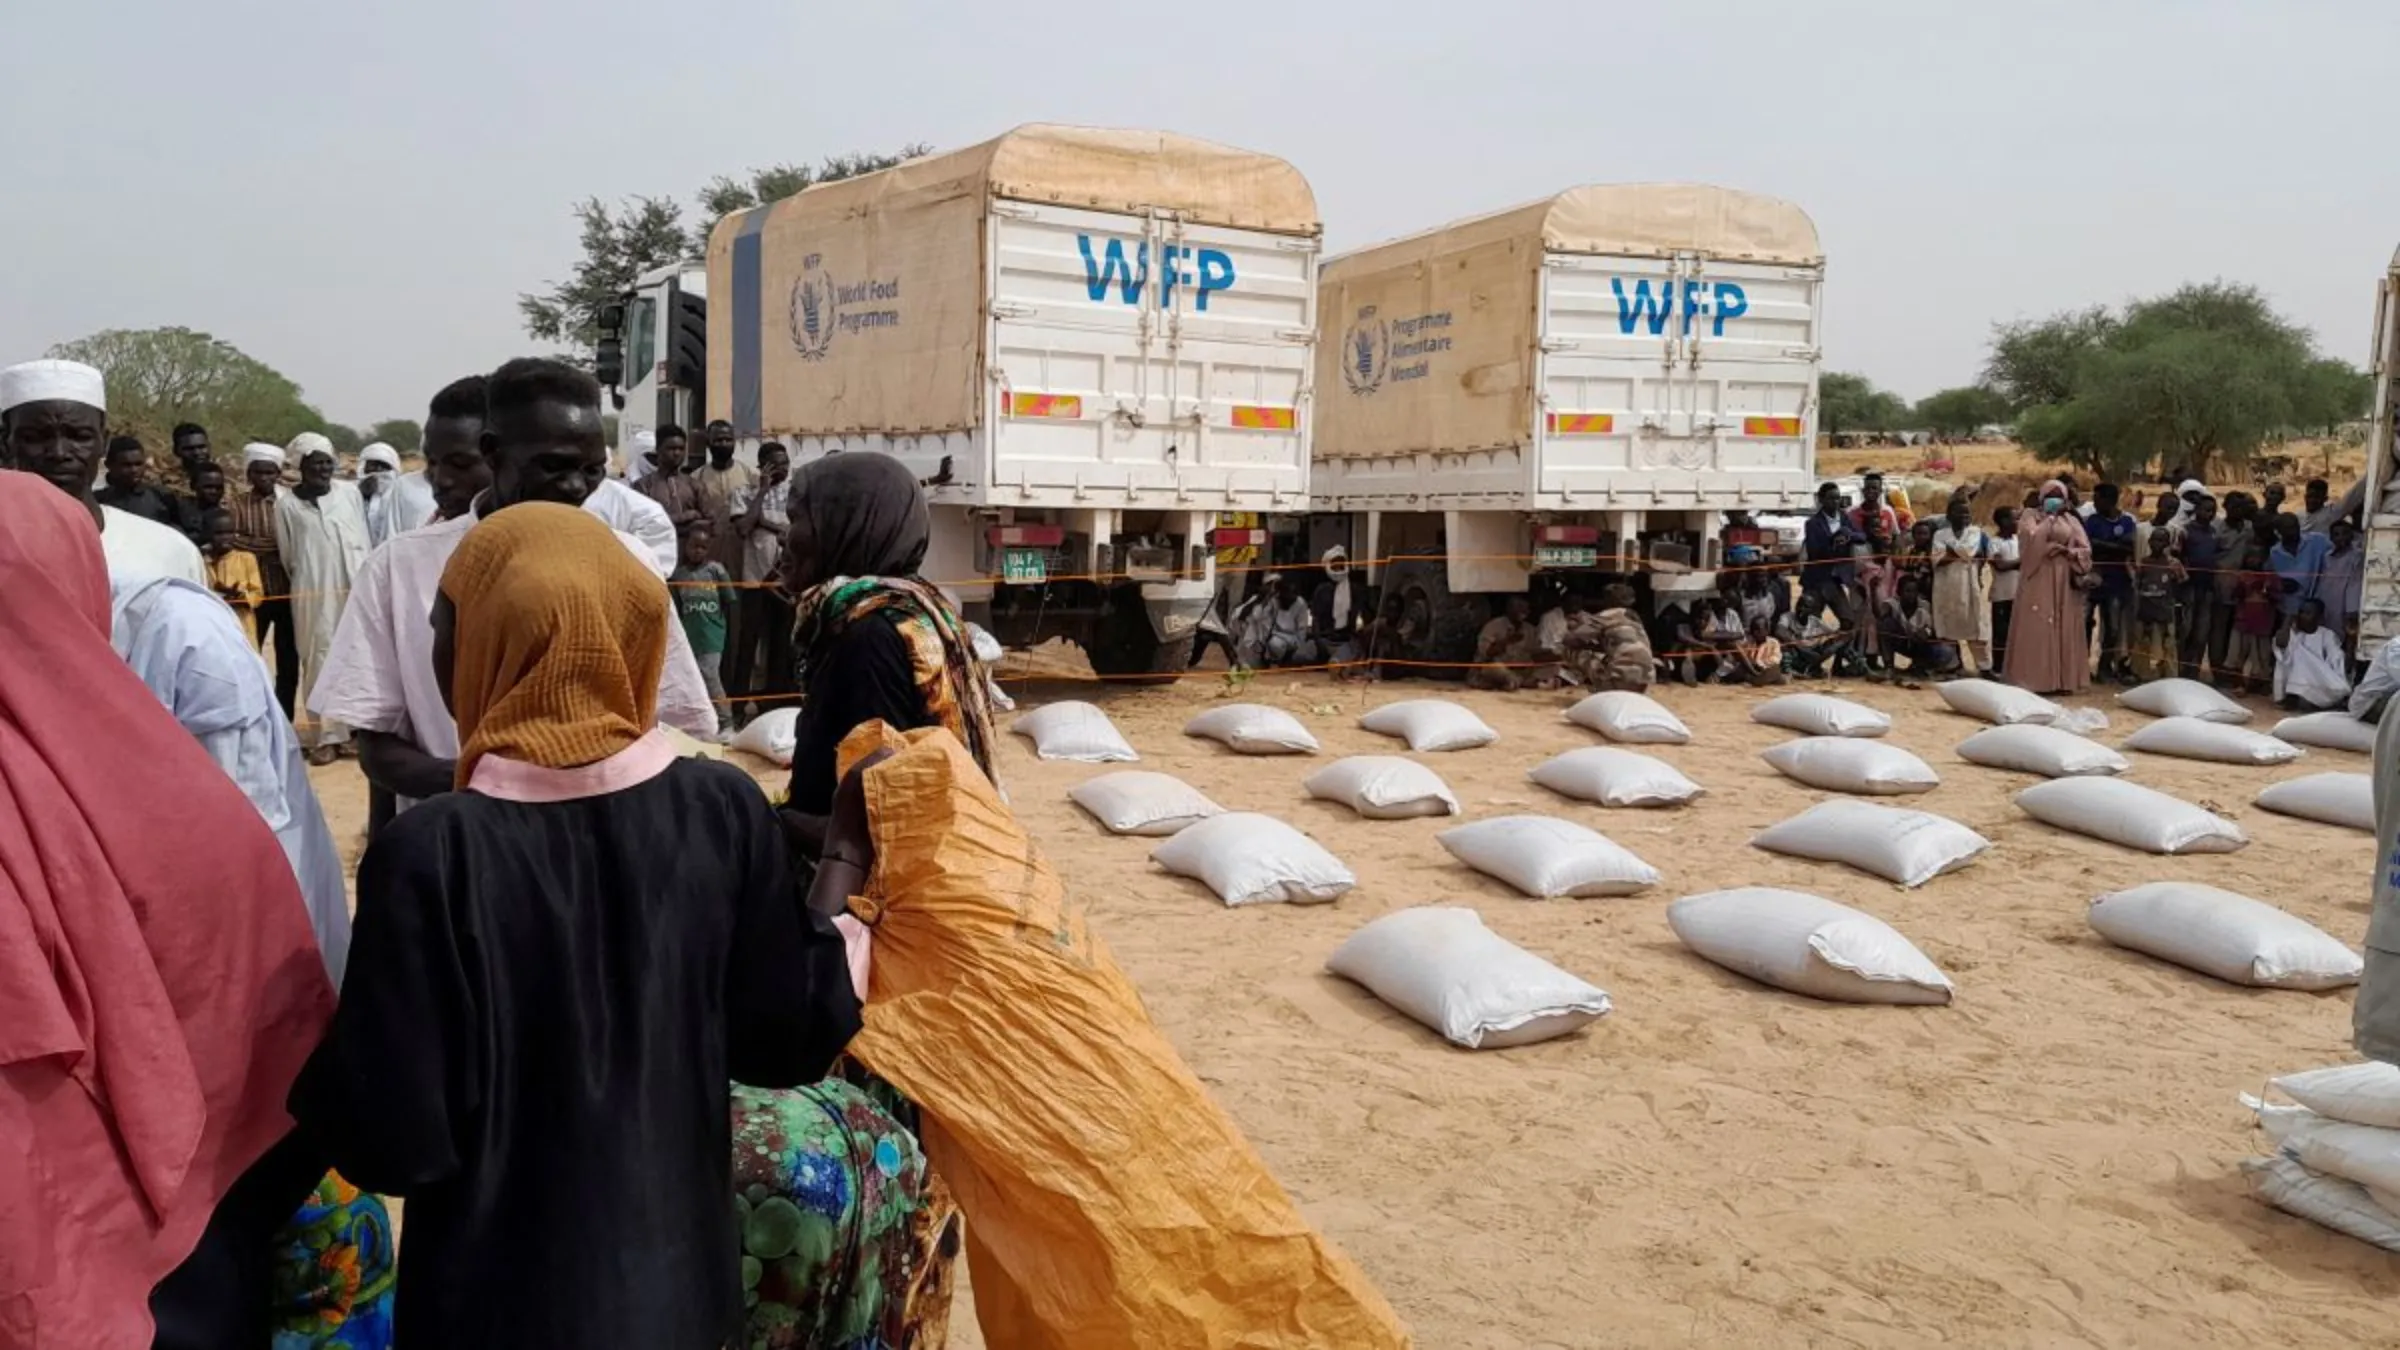 Sudanese refugees who have fled the violence in their country queue to receive food supplements from World Food Programme (WFP) near the border between Sudan and Chad in Adre, Chad April 26, 2023